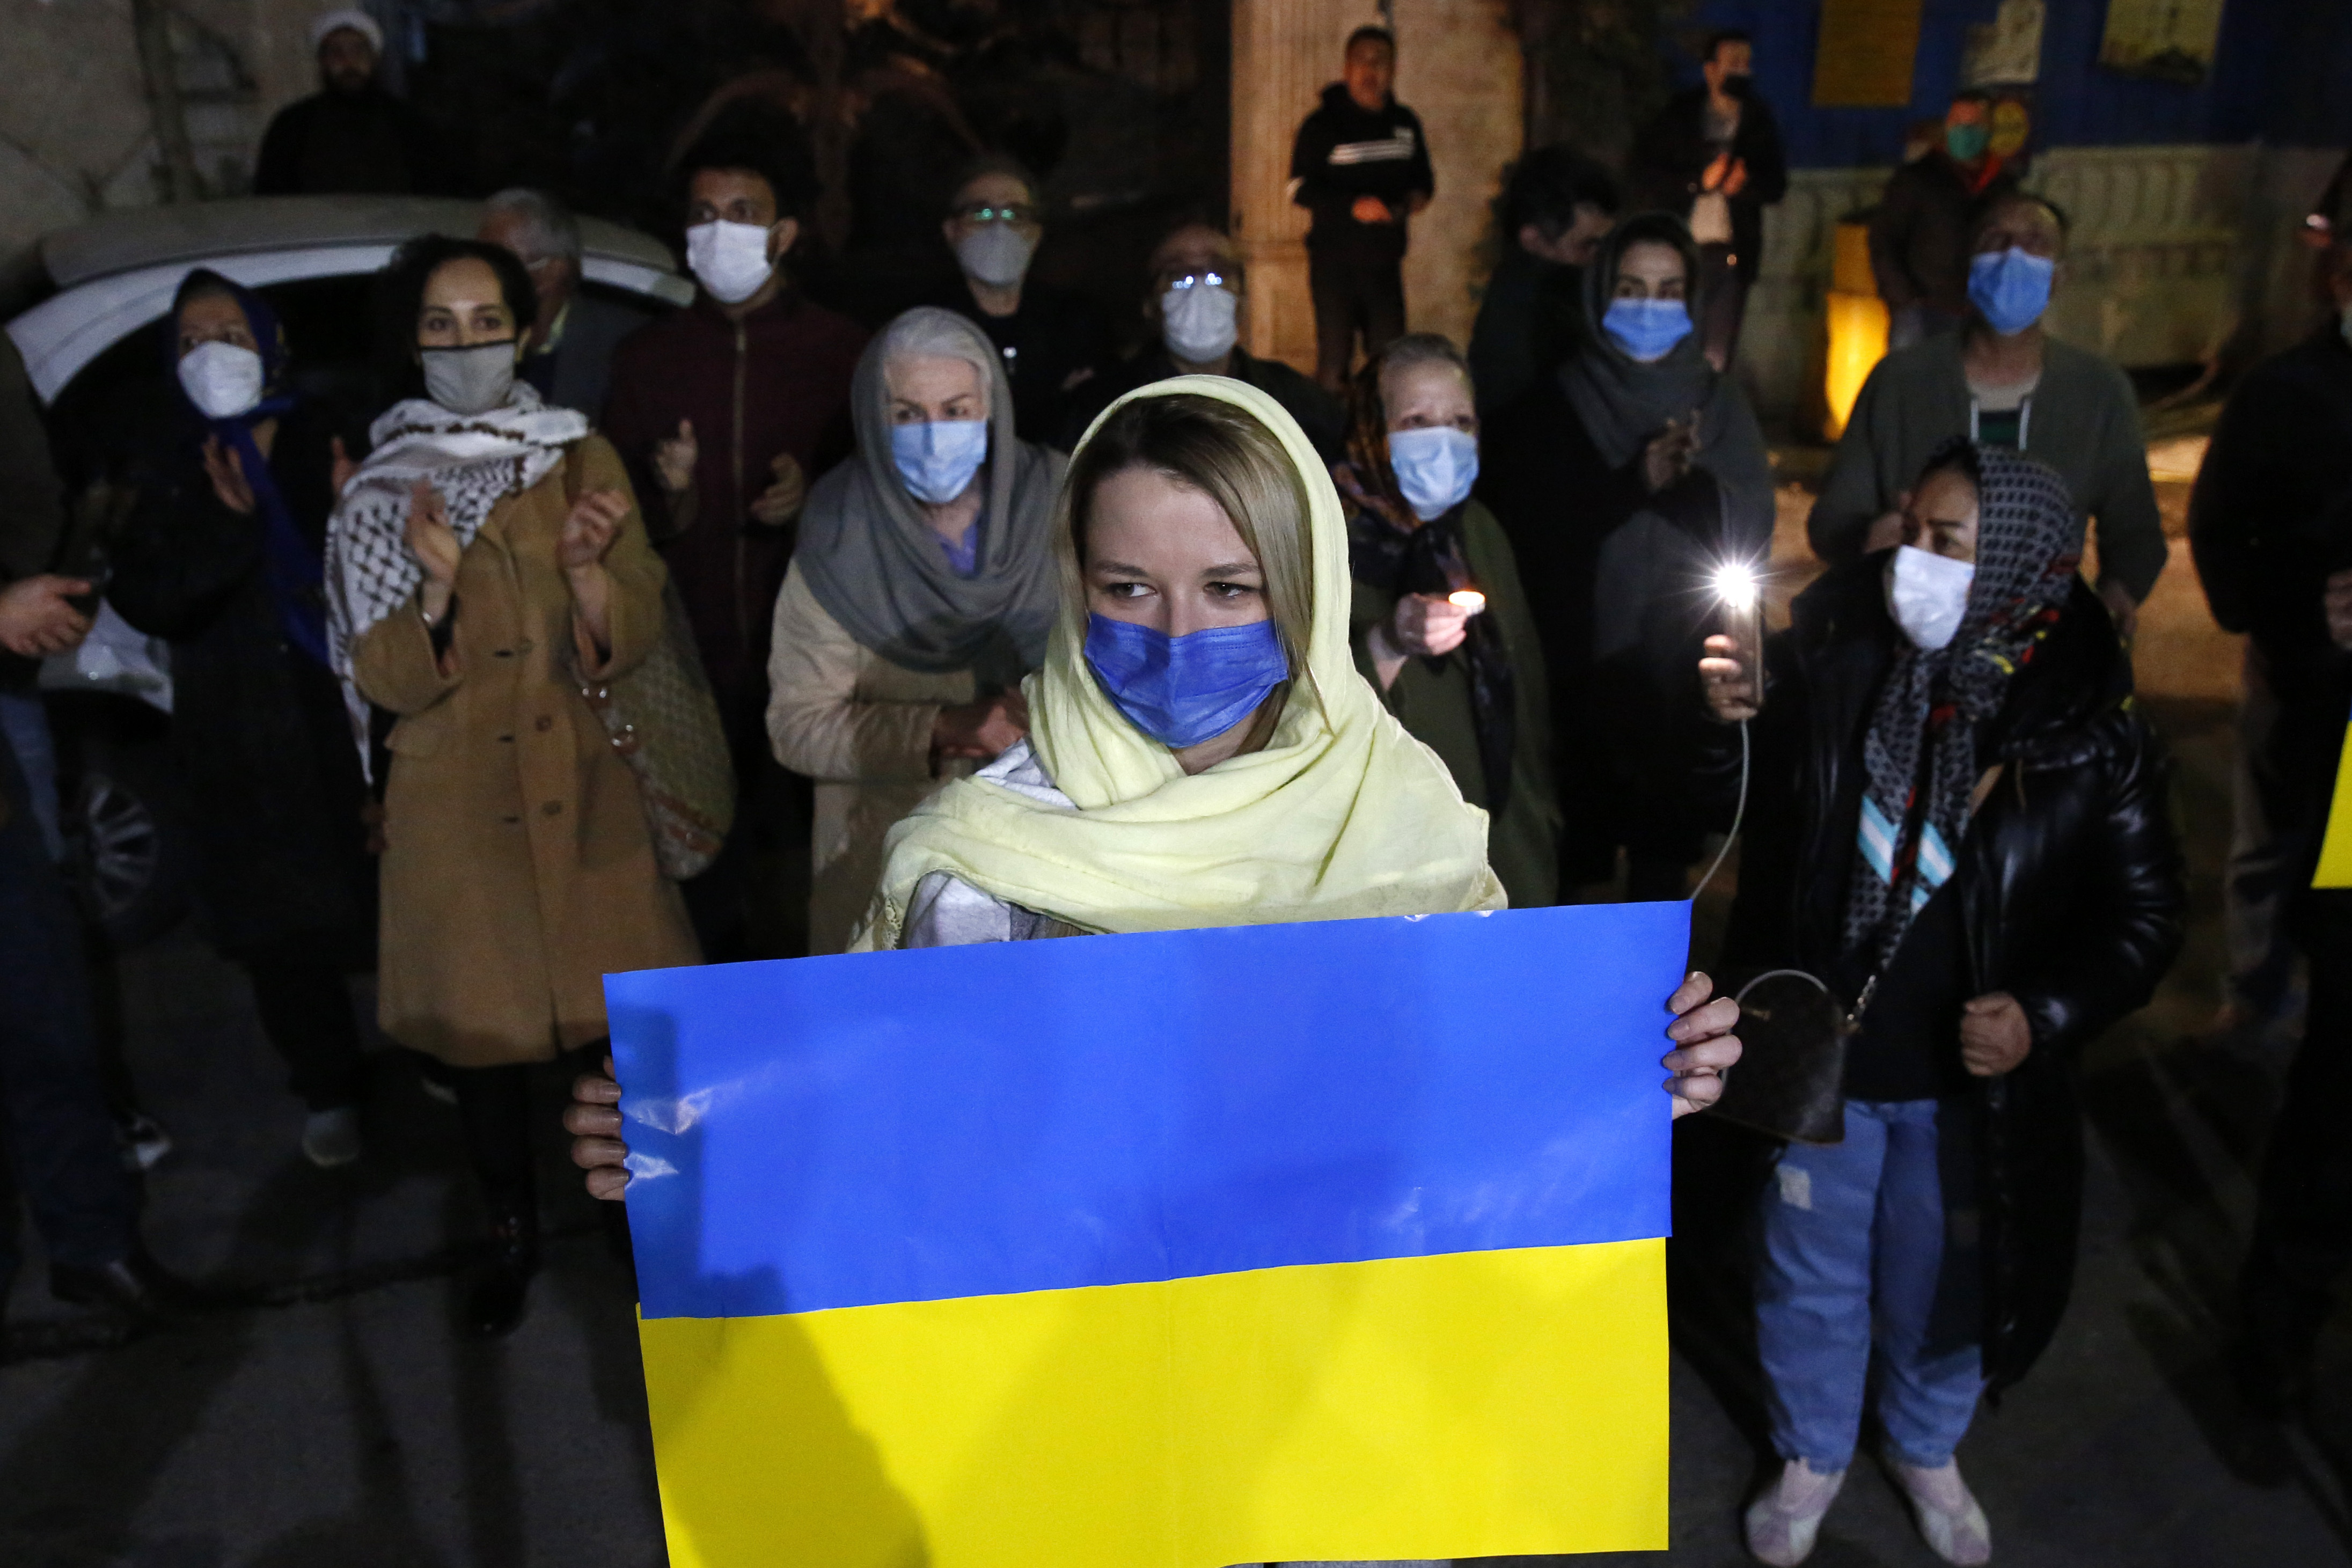 Ukrainian citizens and Iranians gather around Ukrainian Embassy during a protest against Russian attacks on Ukraine, on 26 February 2022, in Tehran, Iran (photo: Fatemeh Bahrami / Anadolu Agency/picture-alliance)